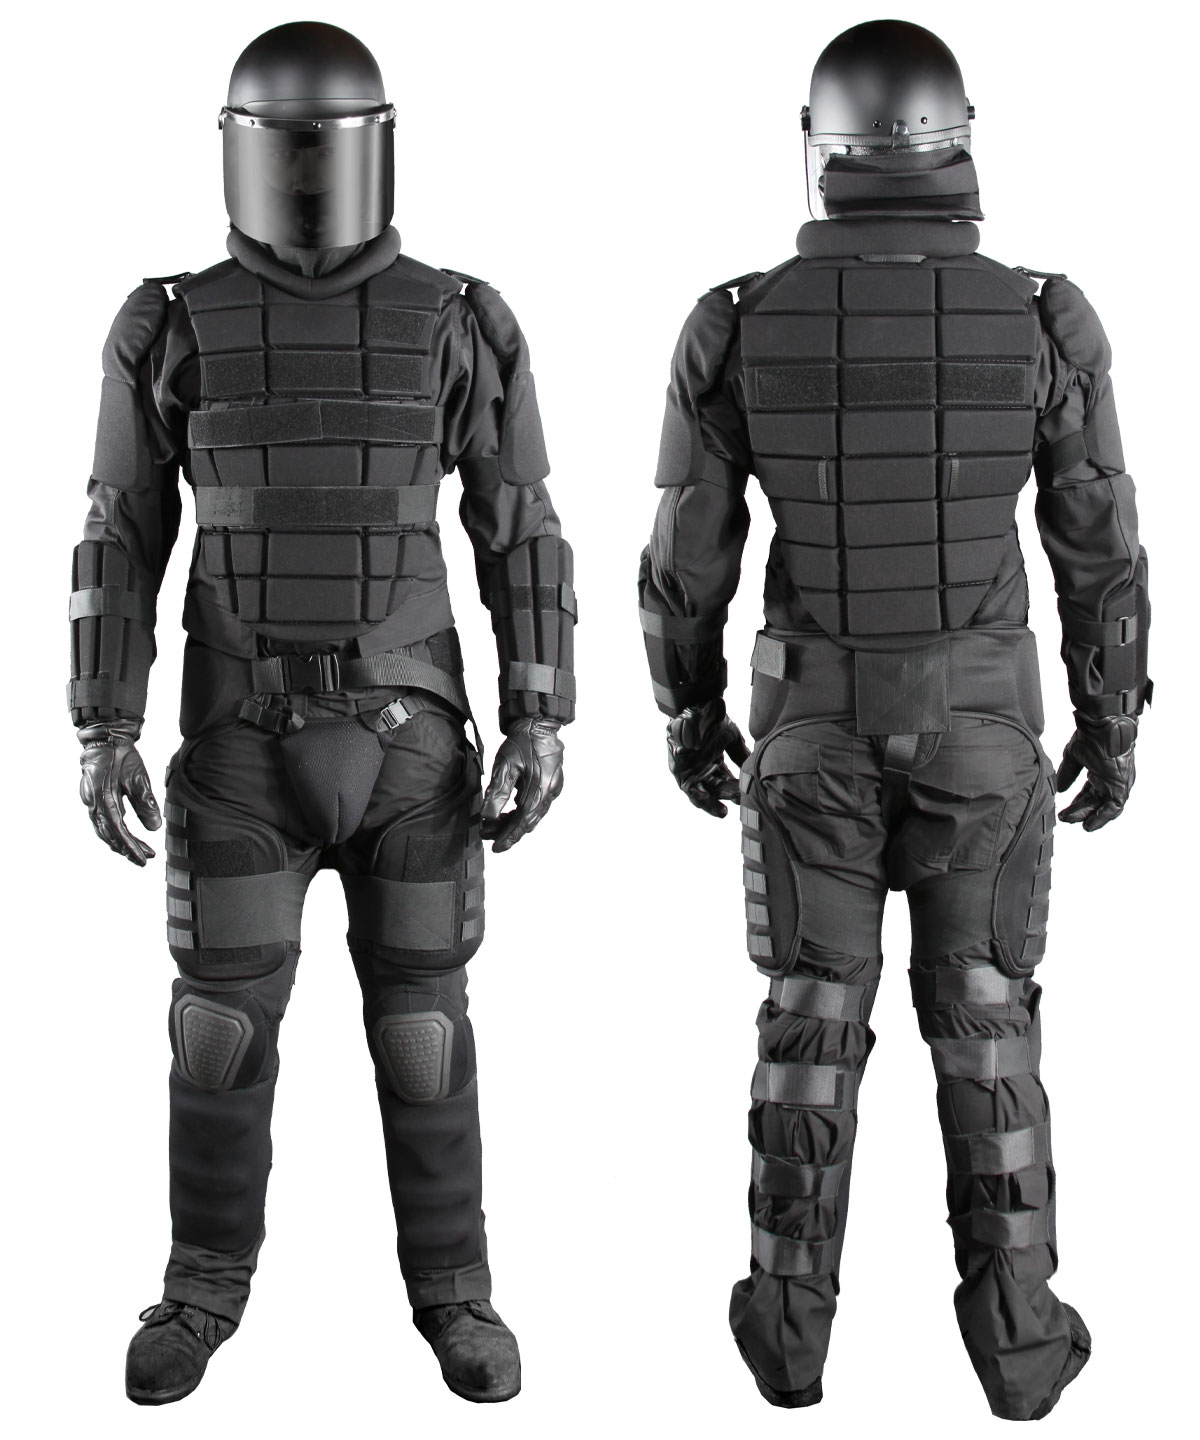 Imperial™ Full Body Protection Kit - Damascus Gear